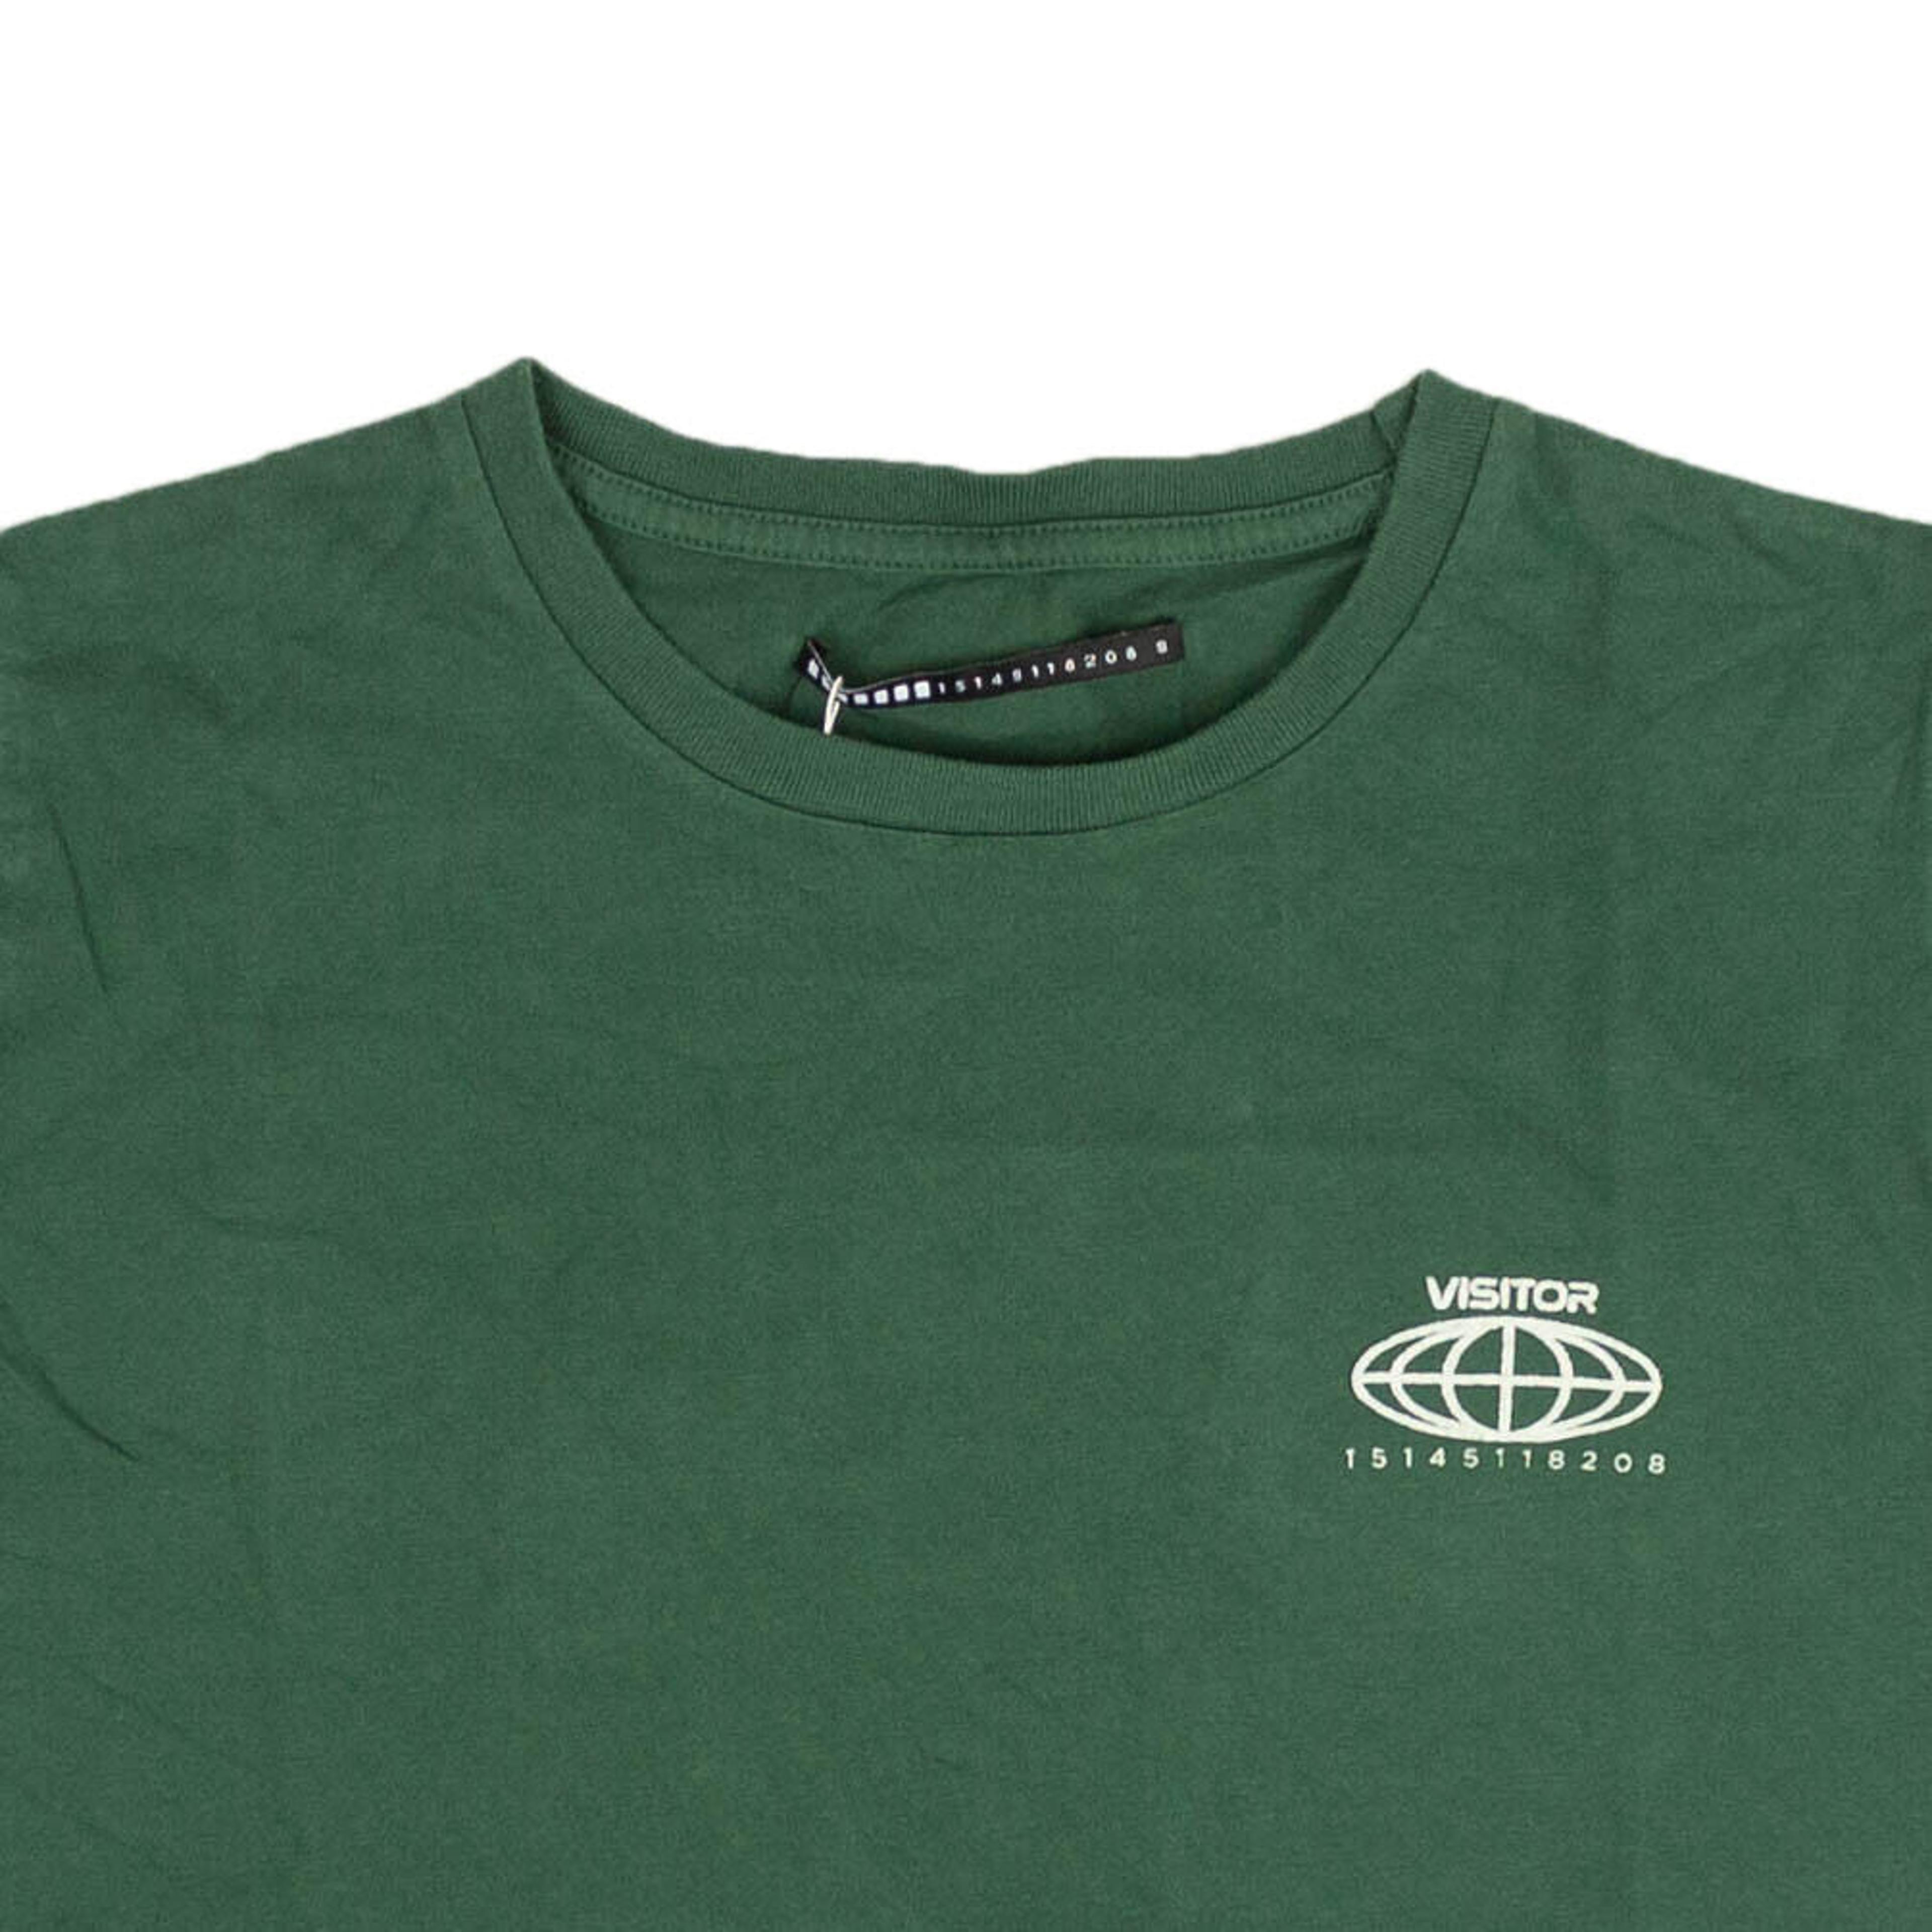 Alternate View 1 of Visitor On Earth Cropped Logo T-Shirt - Green